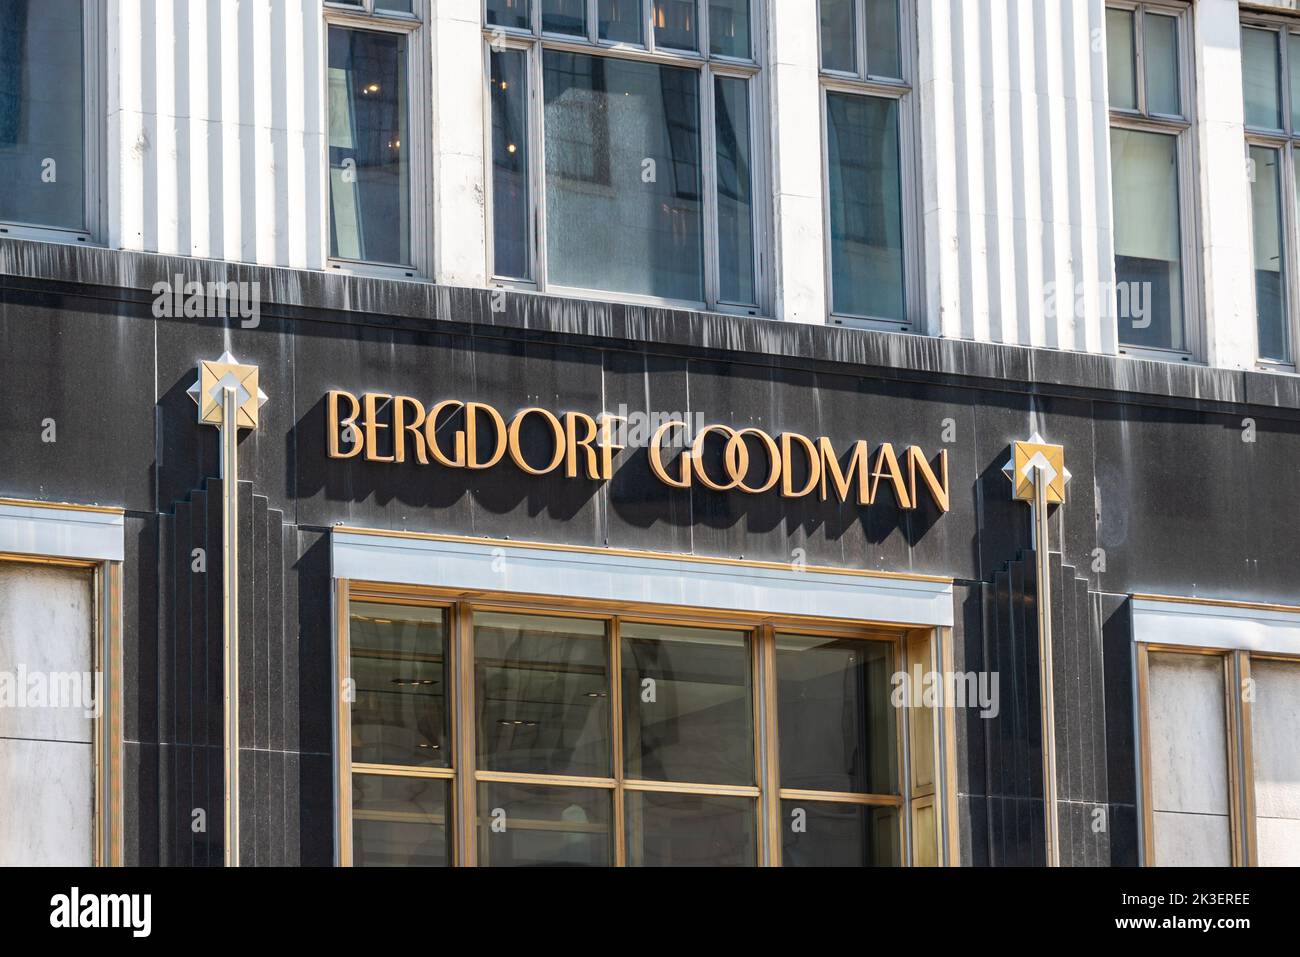 Preservationists Battle Bergdorf Goodman Over Future Of Midtown  Headquarters - New York YIMBY